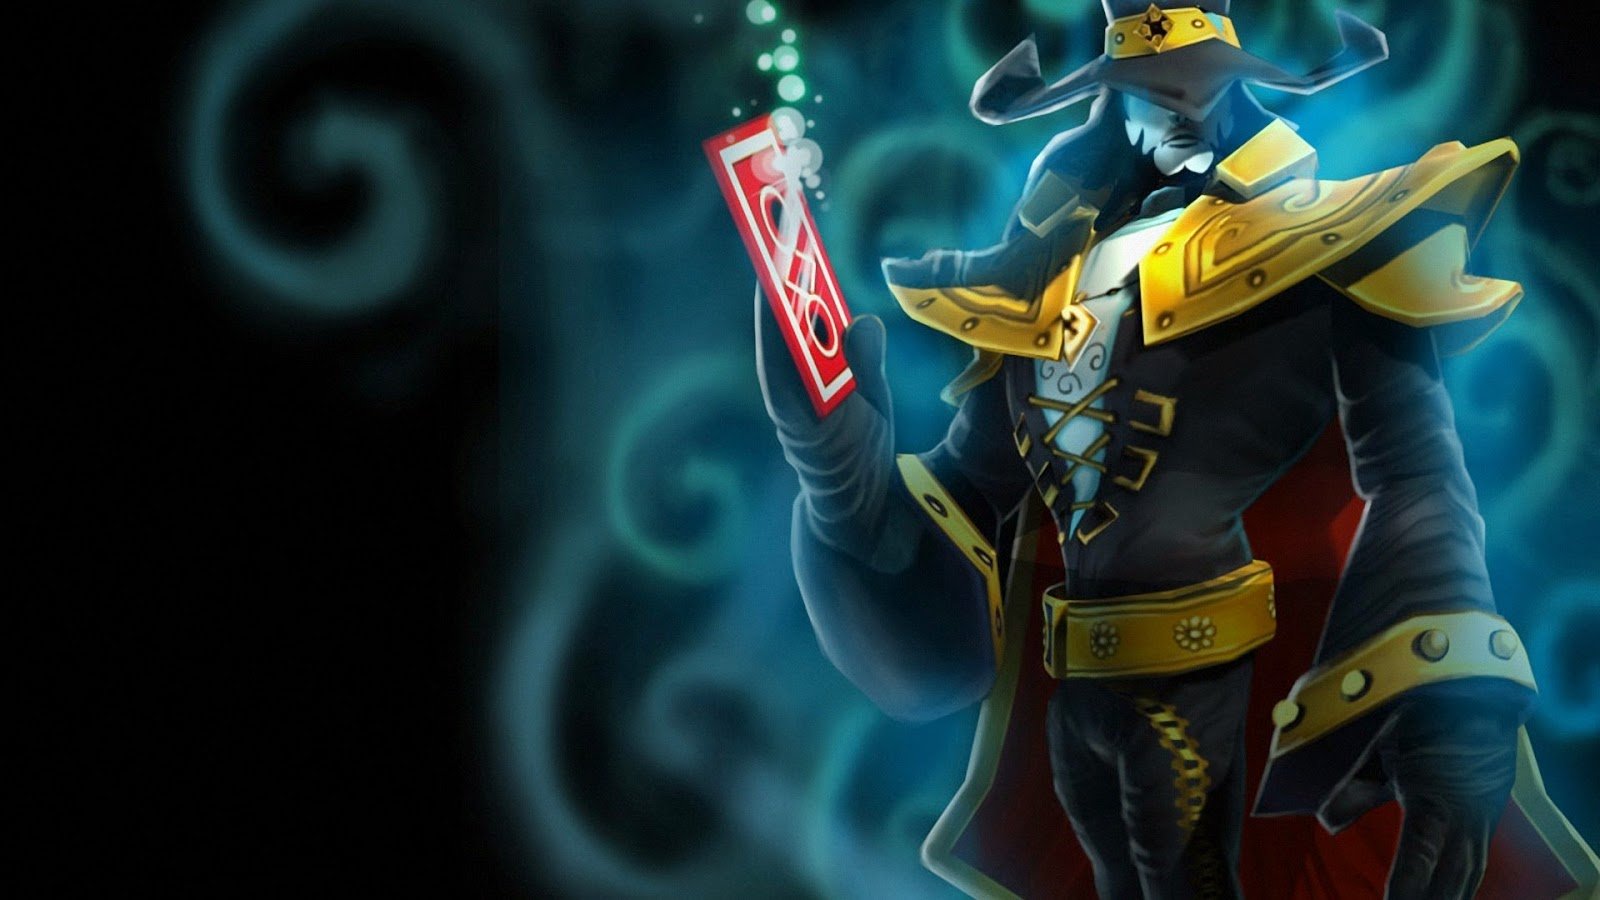 78+ Twisted Fate Wallpaper on WallpaperSafari Musketeer Twisted Fate.